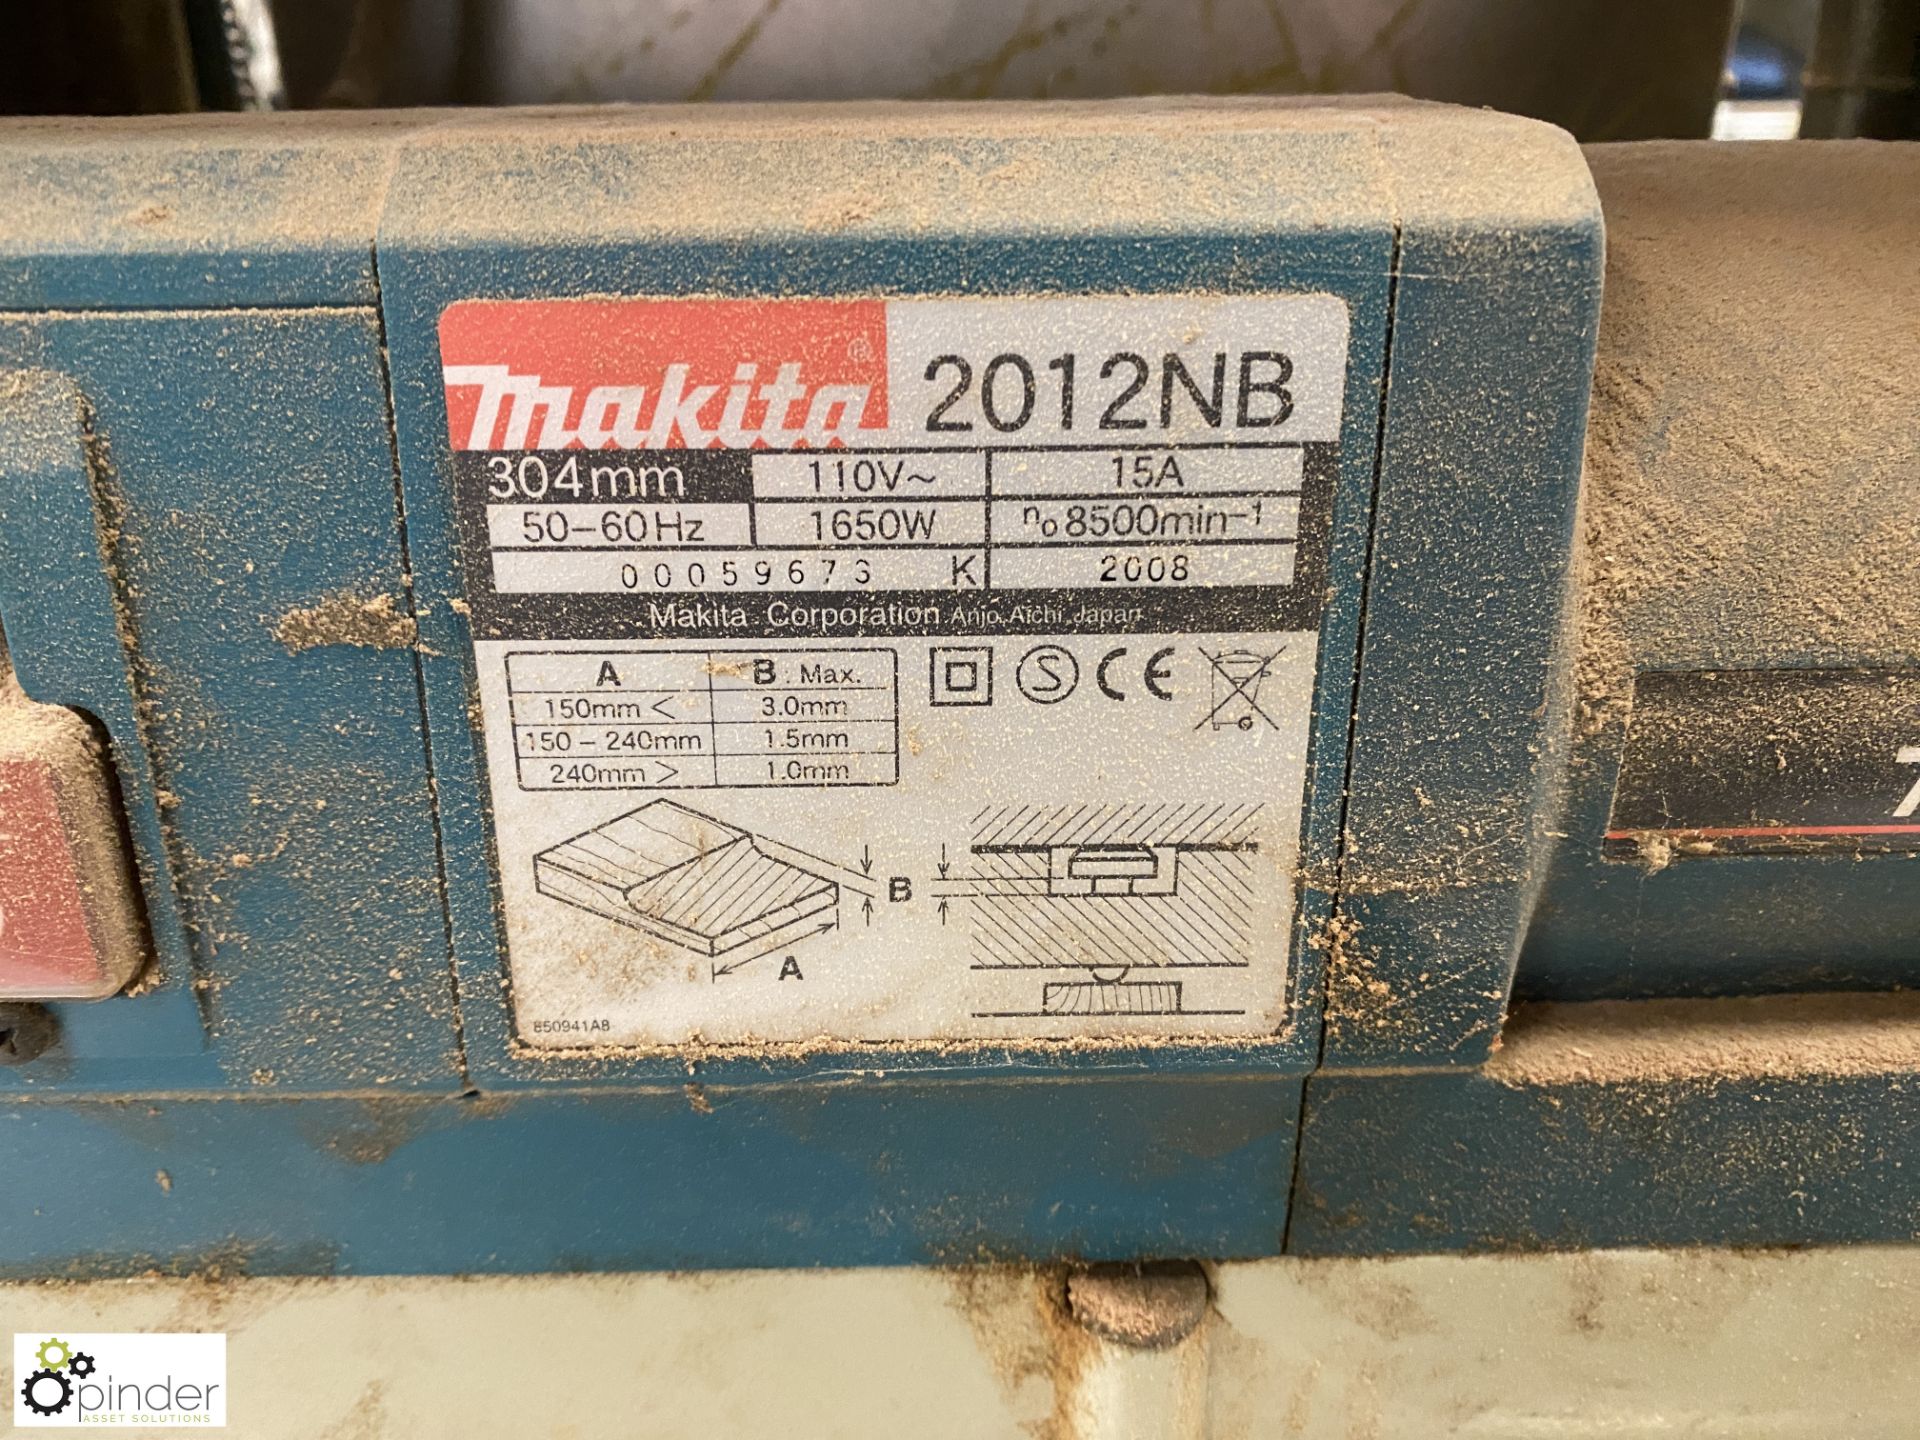 Makita 2012 NB Portable Planer Thicknesser, 300mm wide, 110volts - Image 3 of 7